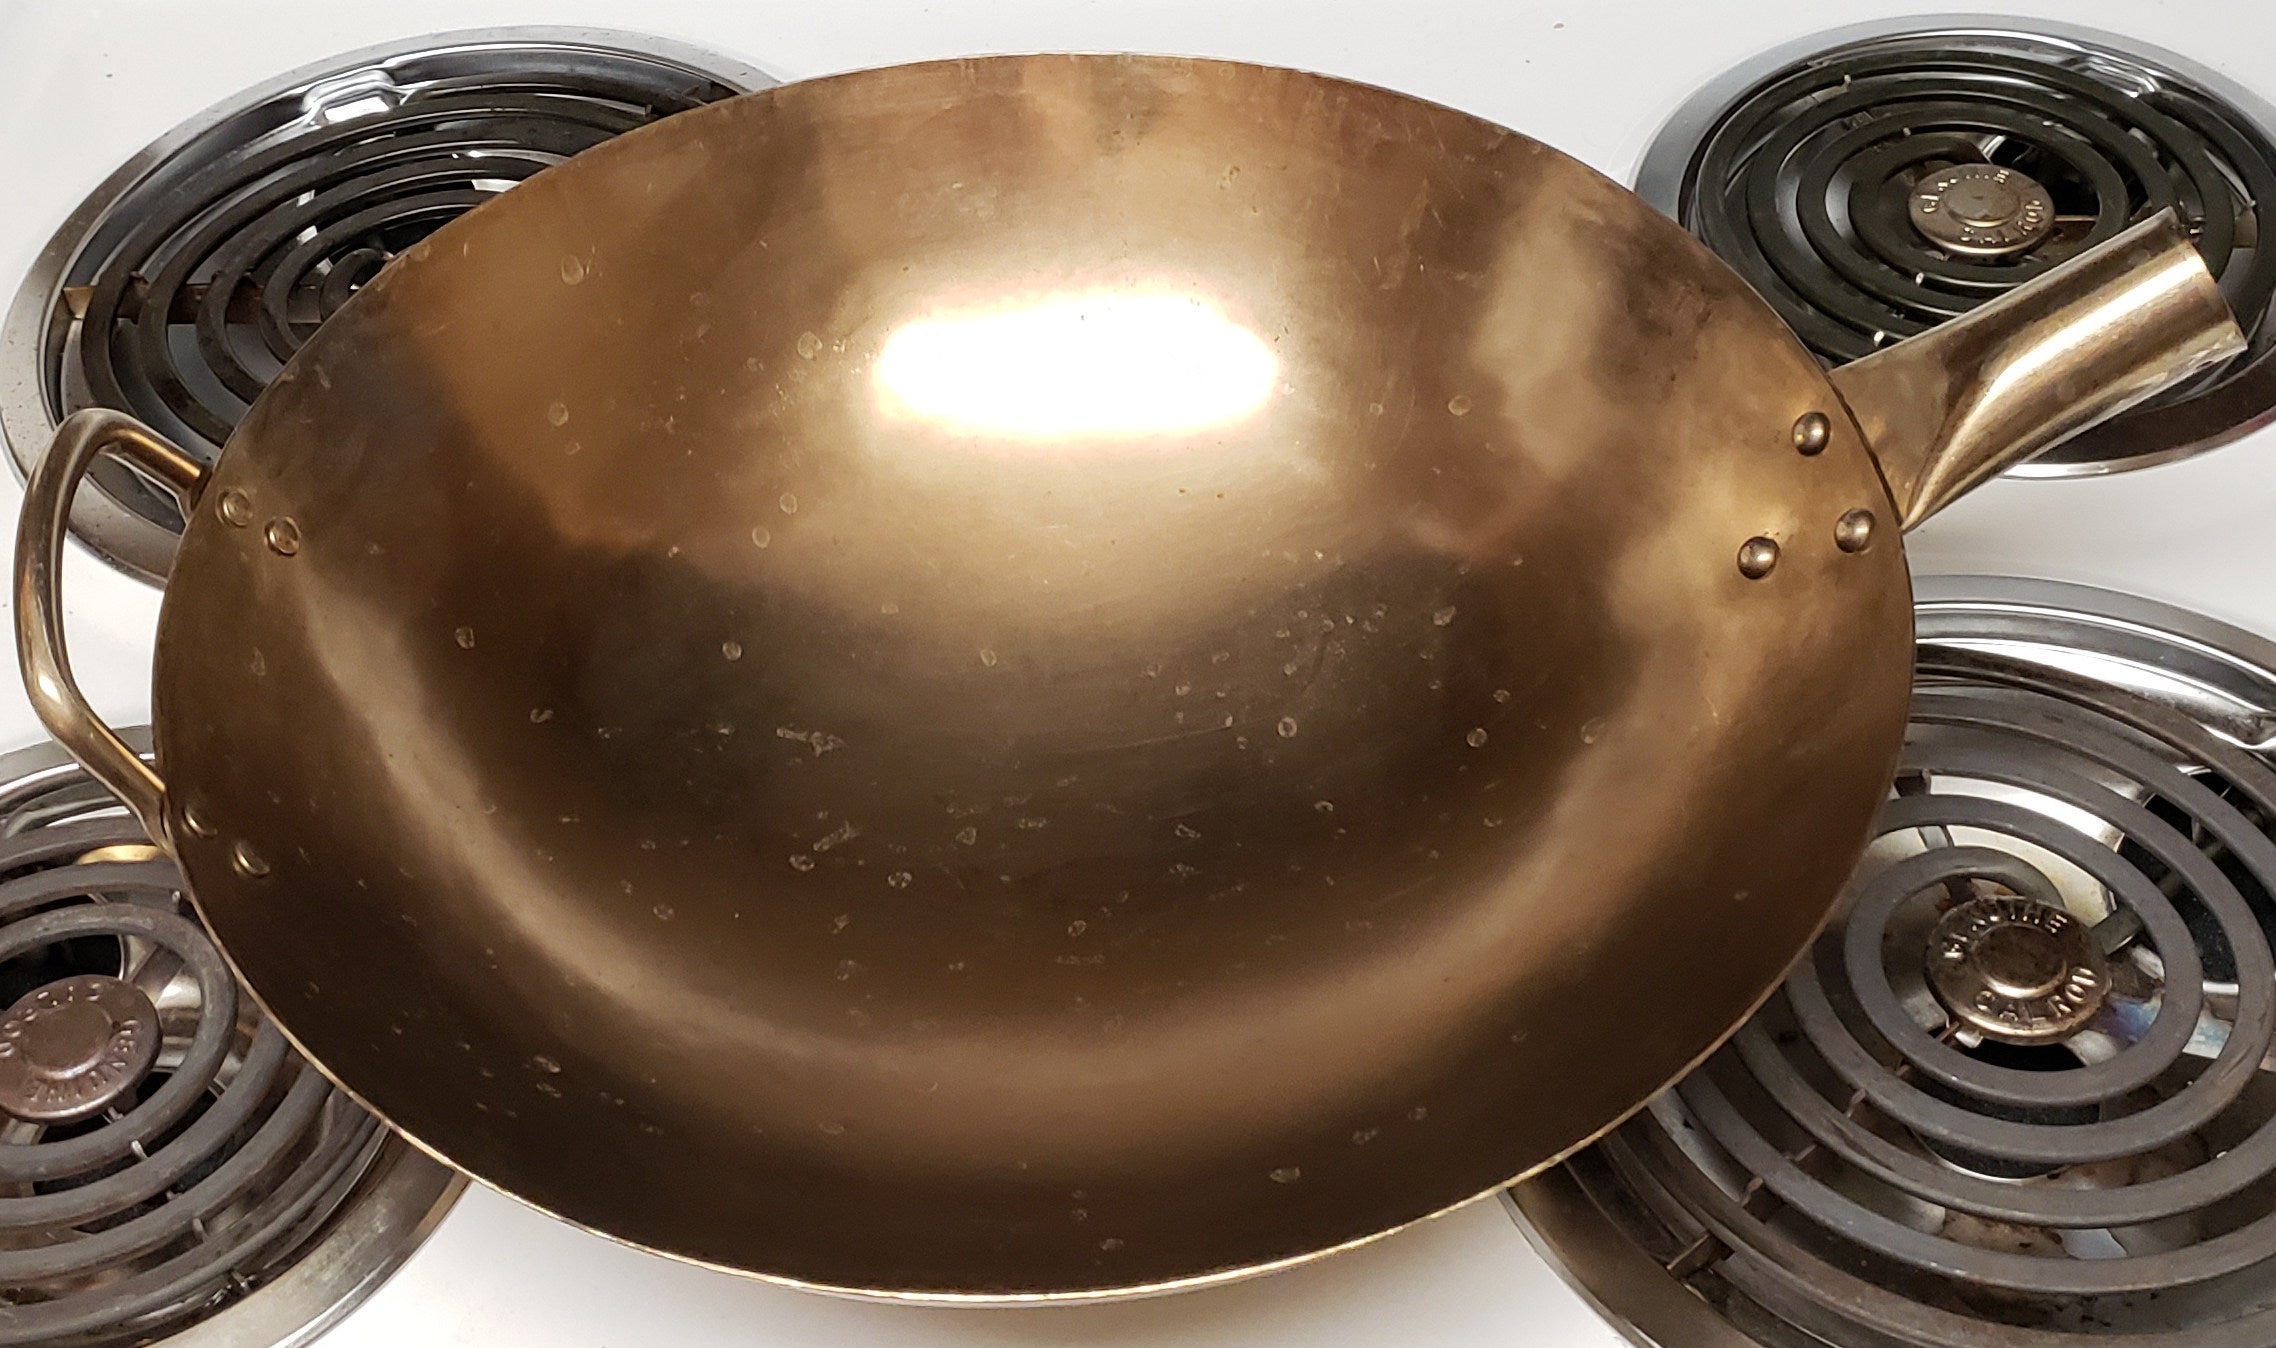 Seasoning a Wok on an Induction Cooktop